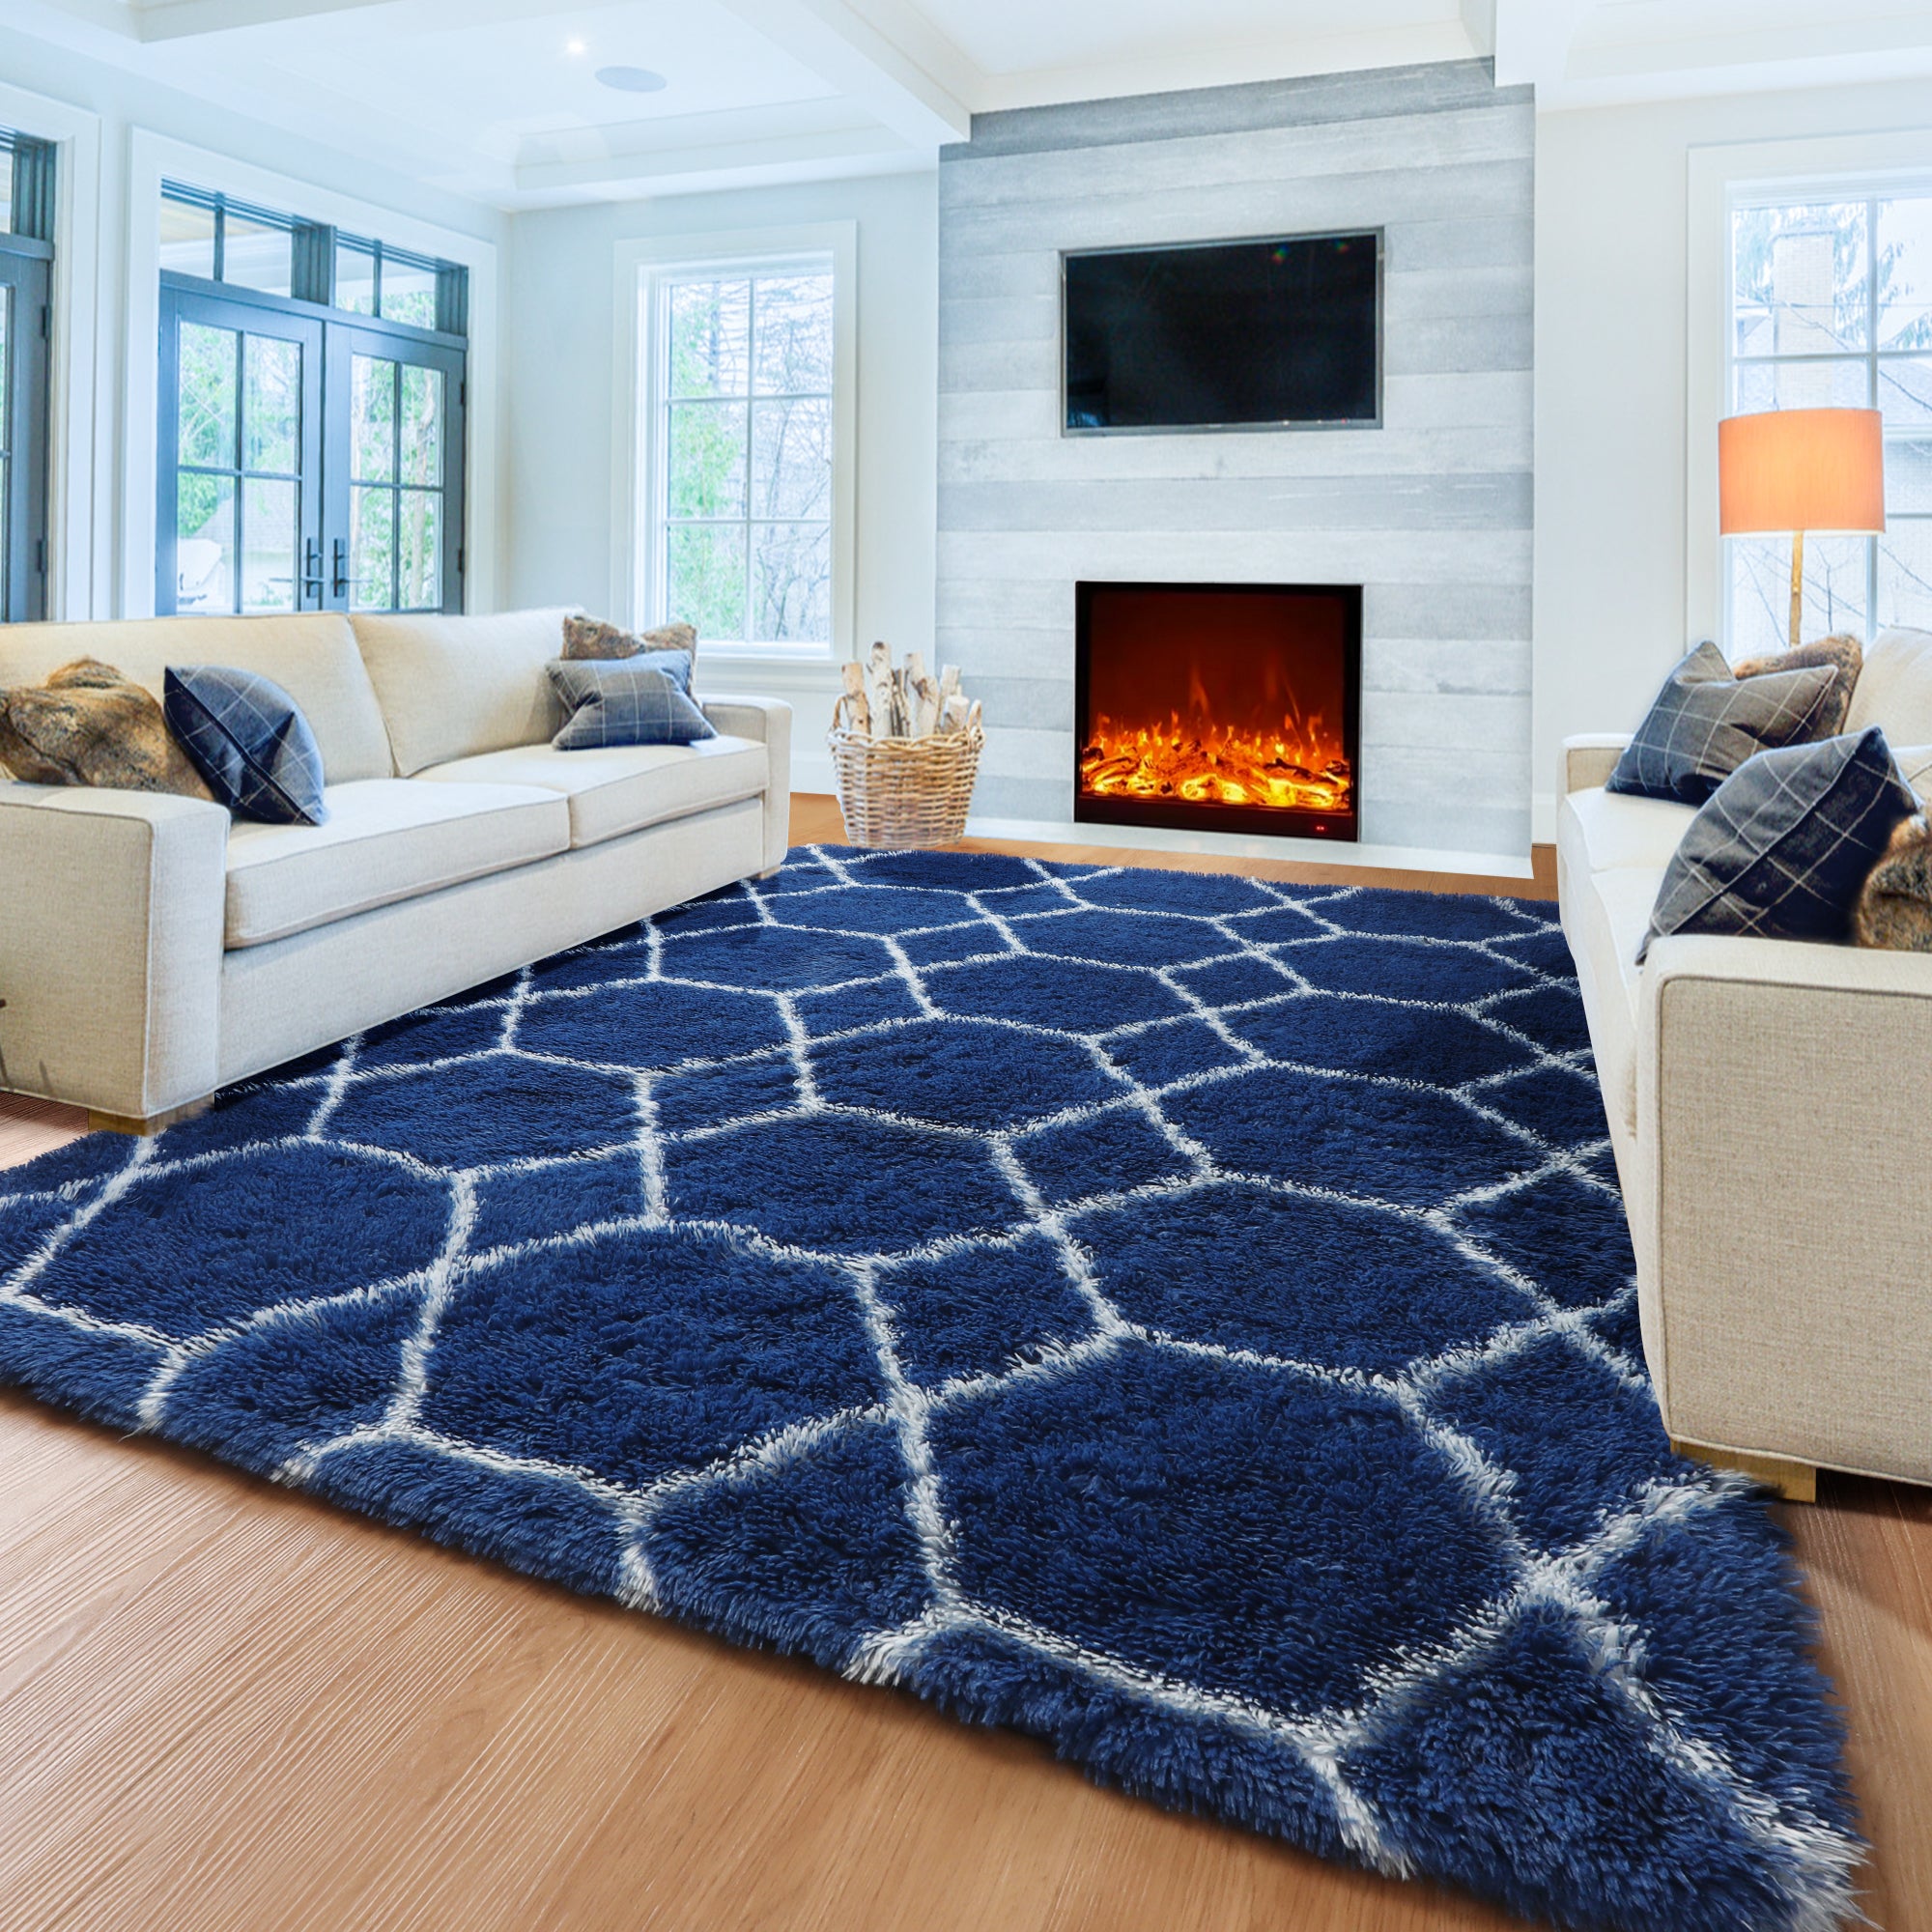 Fluffy Moroccan Navy and White Rugs